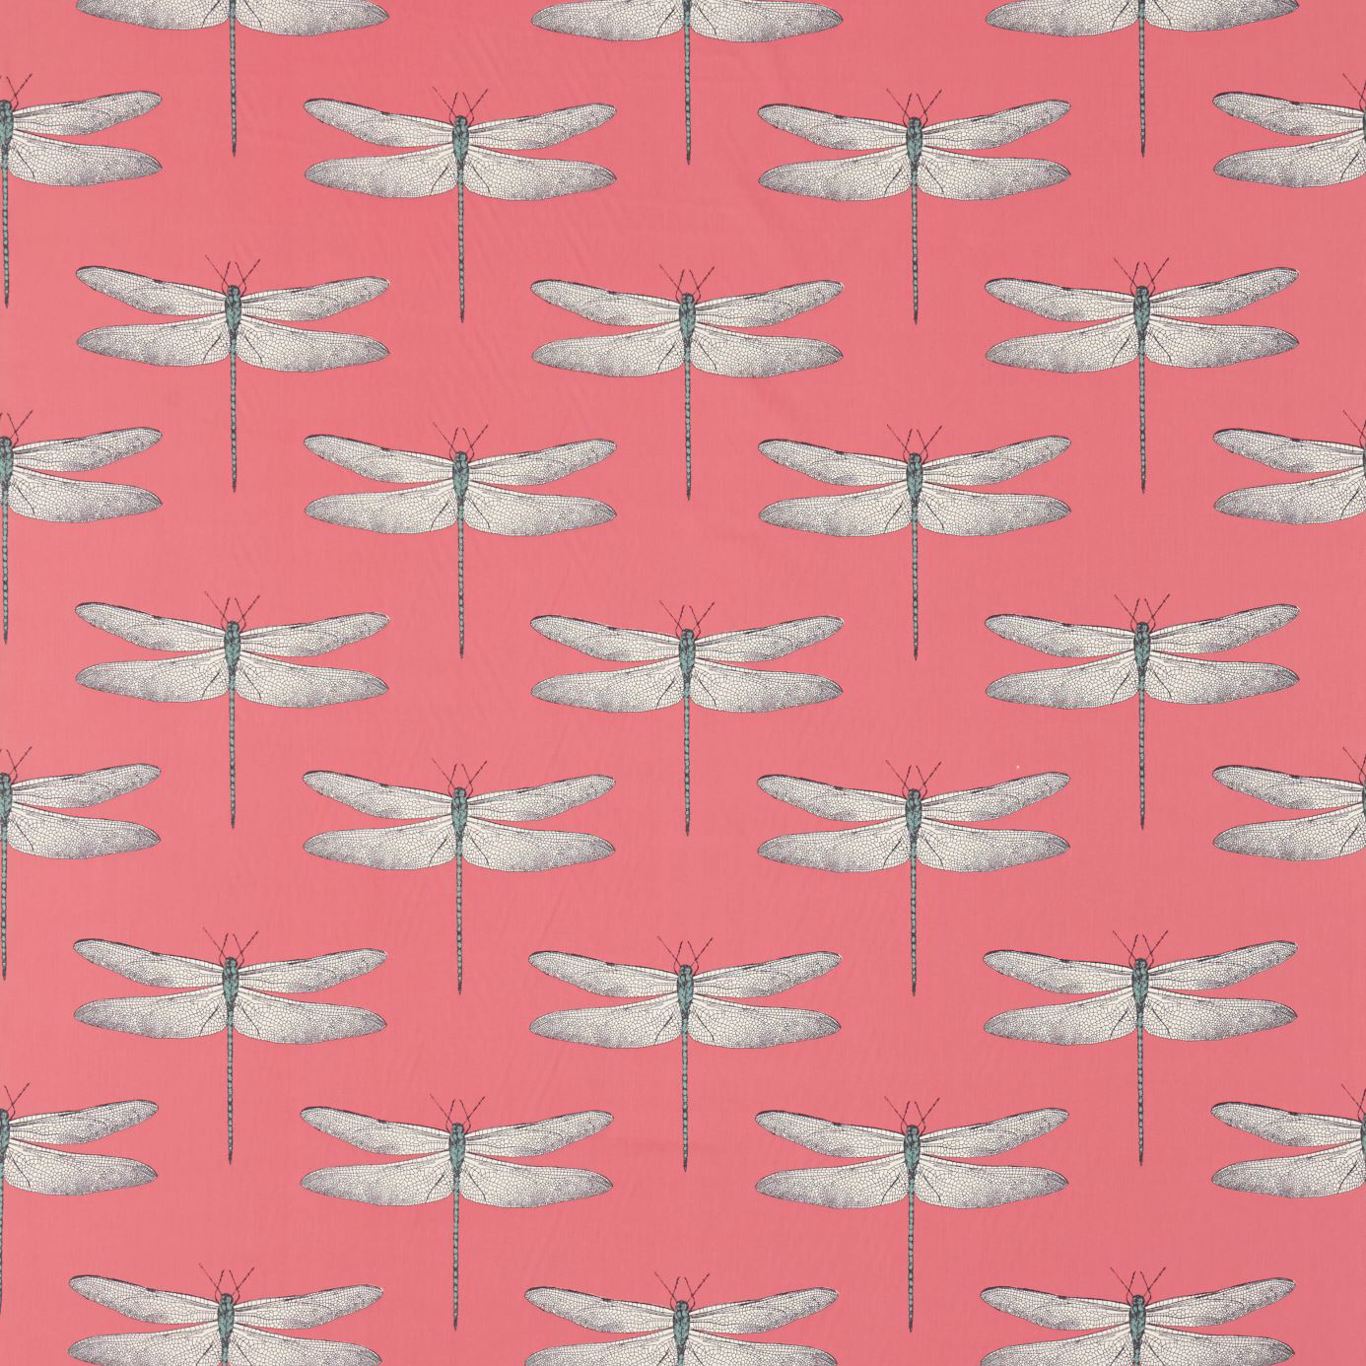 Demoiselle Coral/Mint Fabric by HAR